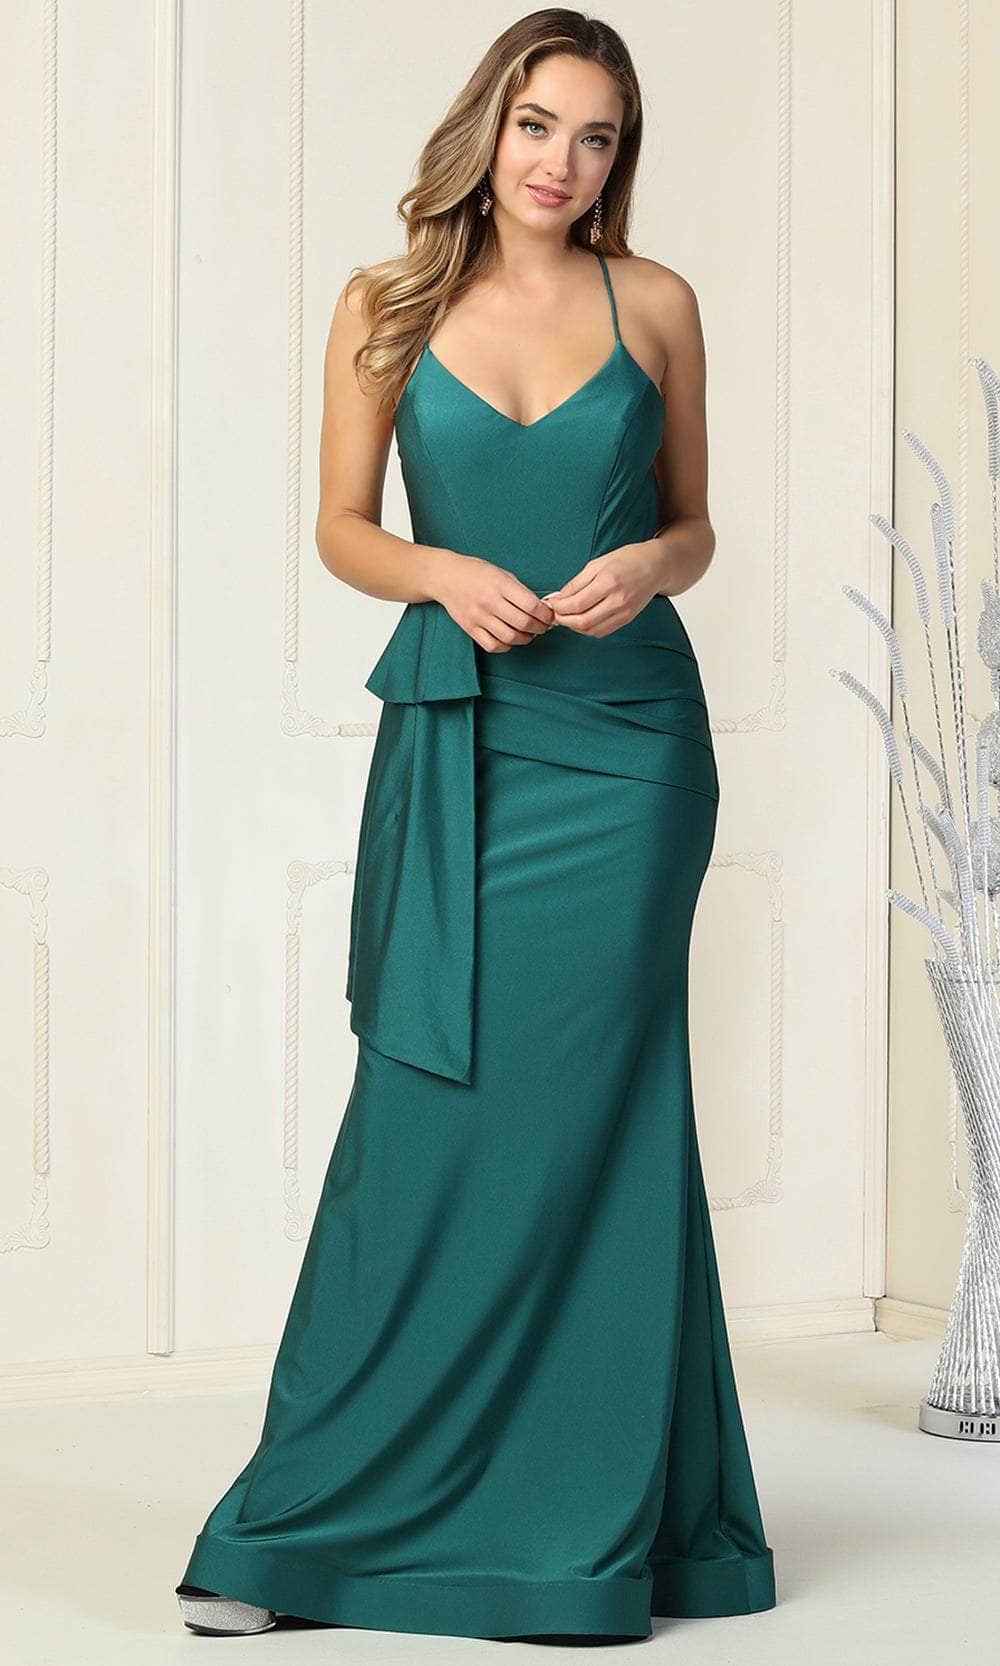 May Queen MQ1832 - V-Neck Peplum Formal Gown Special Occasion Dress